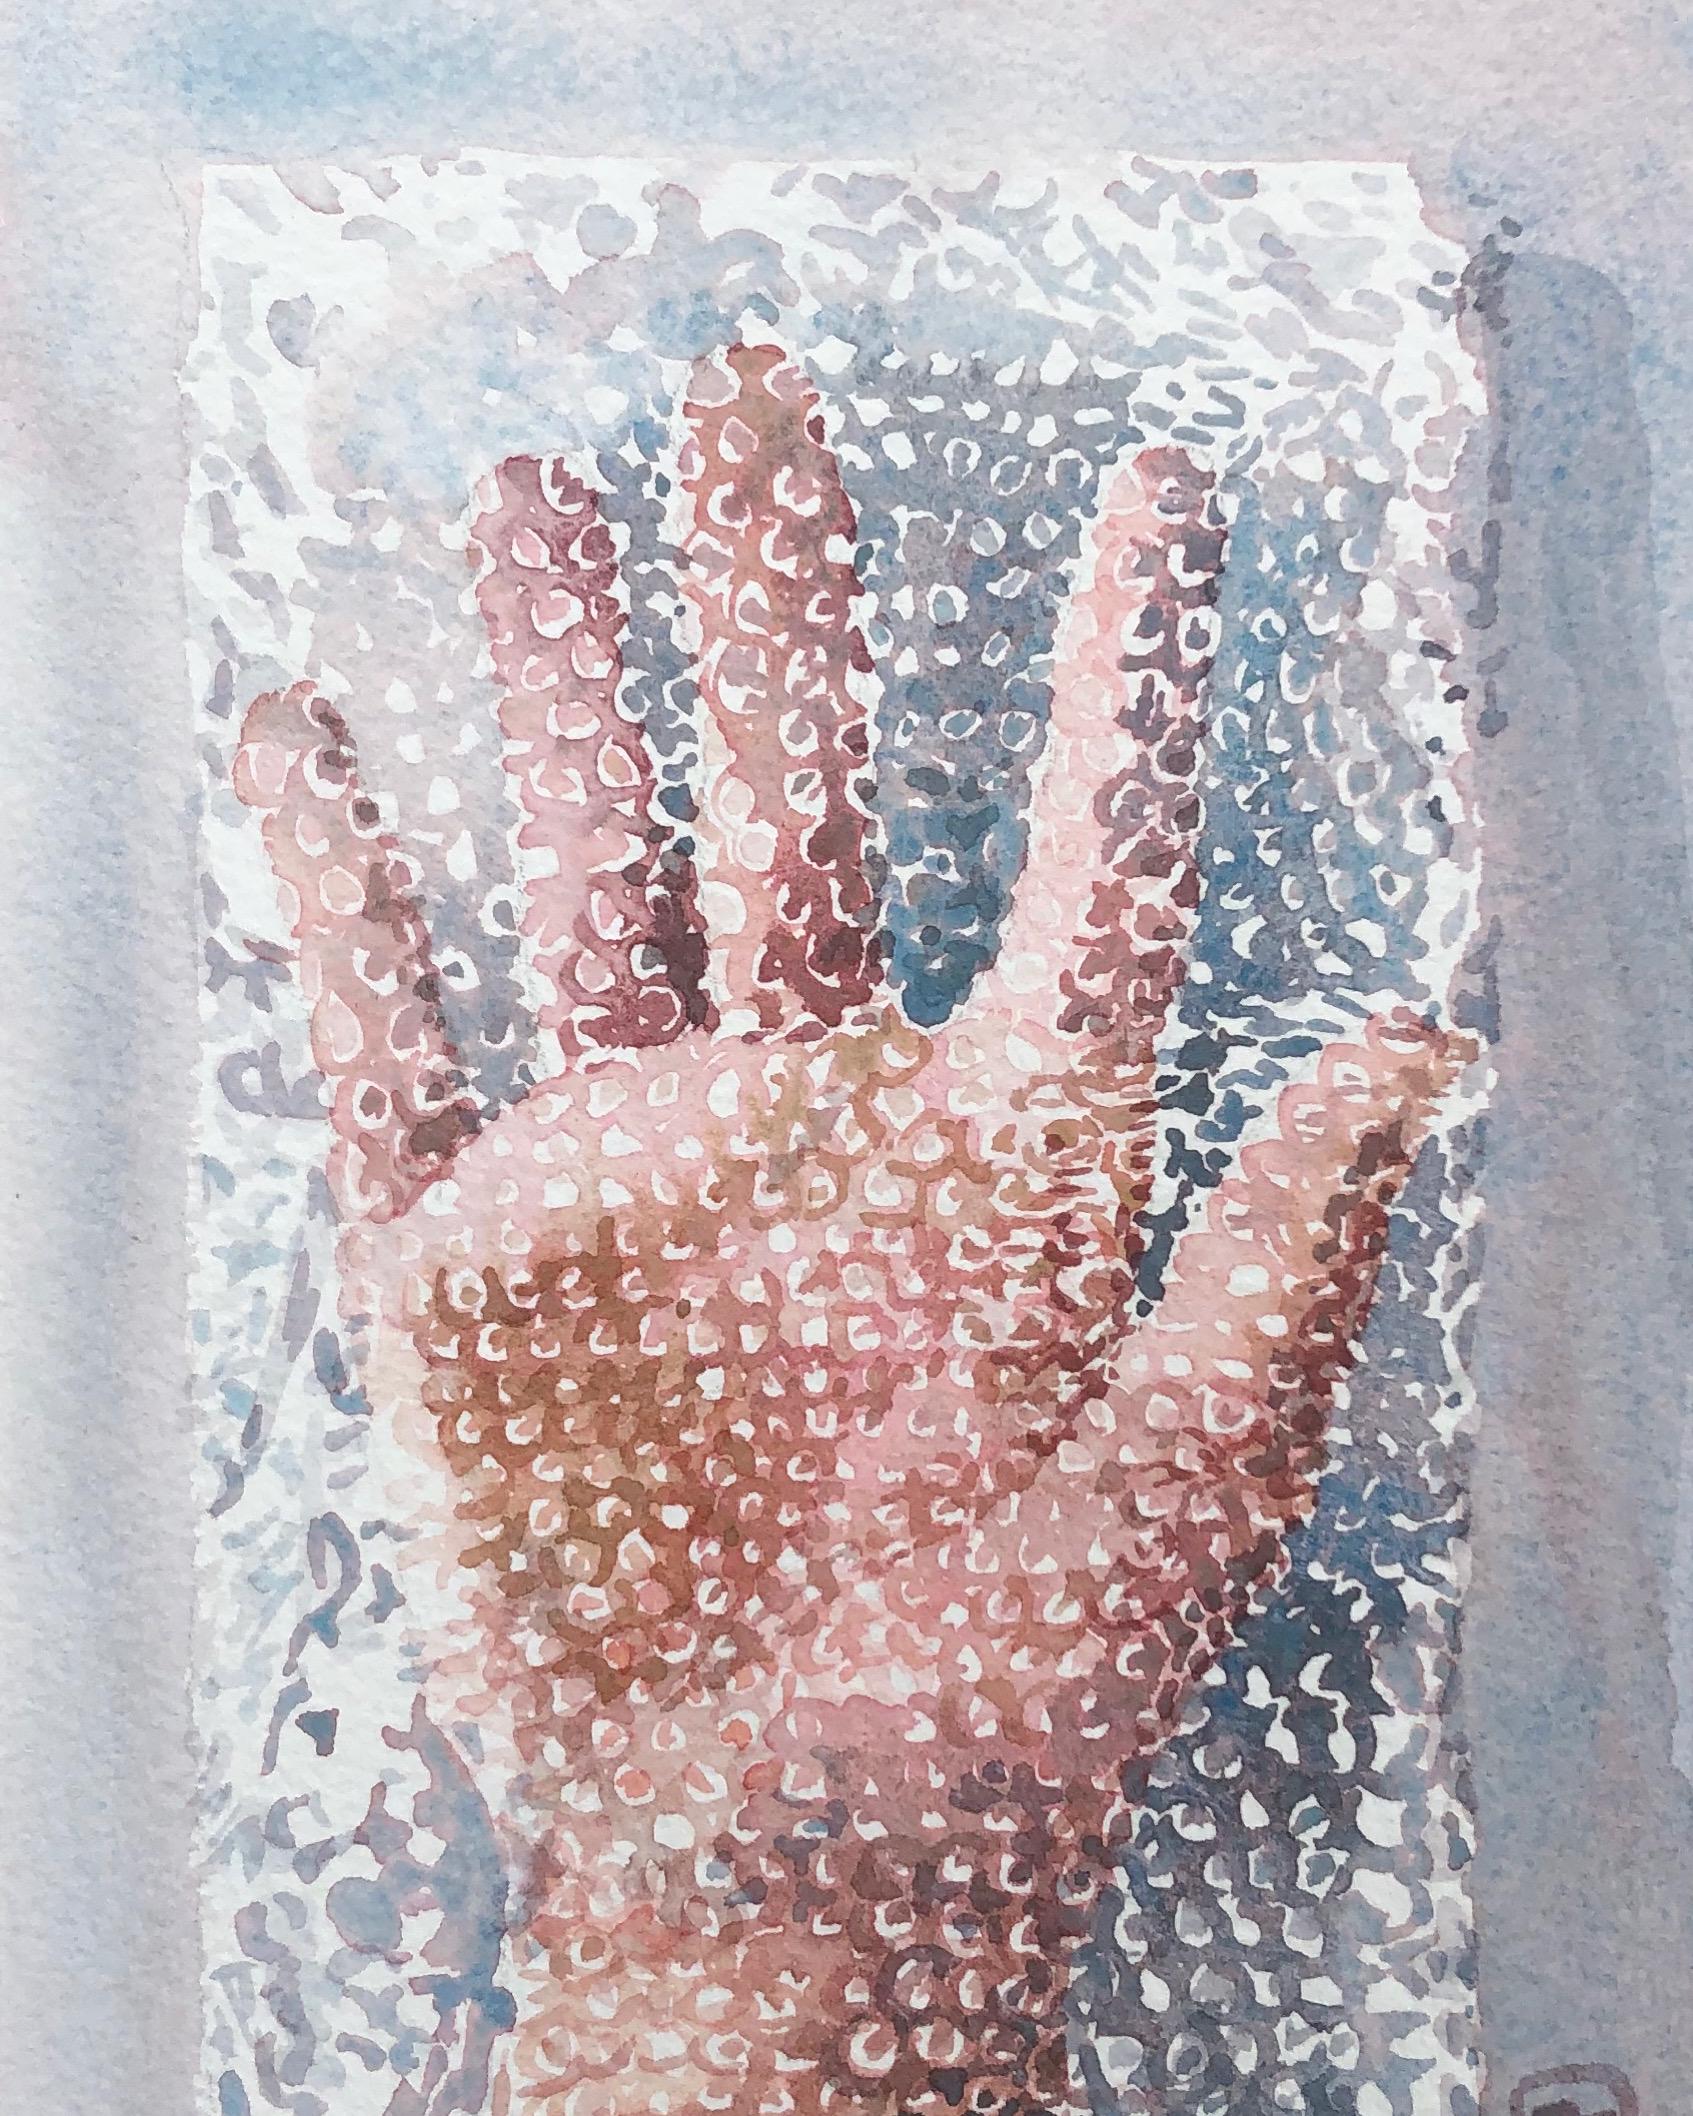 "POOR ME", watercolor, hand, bubble wrap, safety, protection, isolated, virus